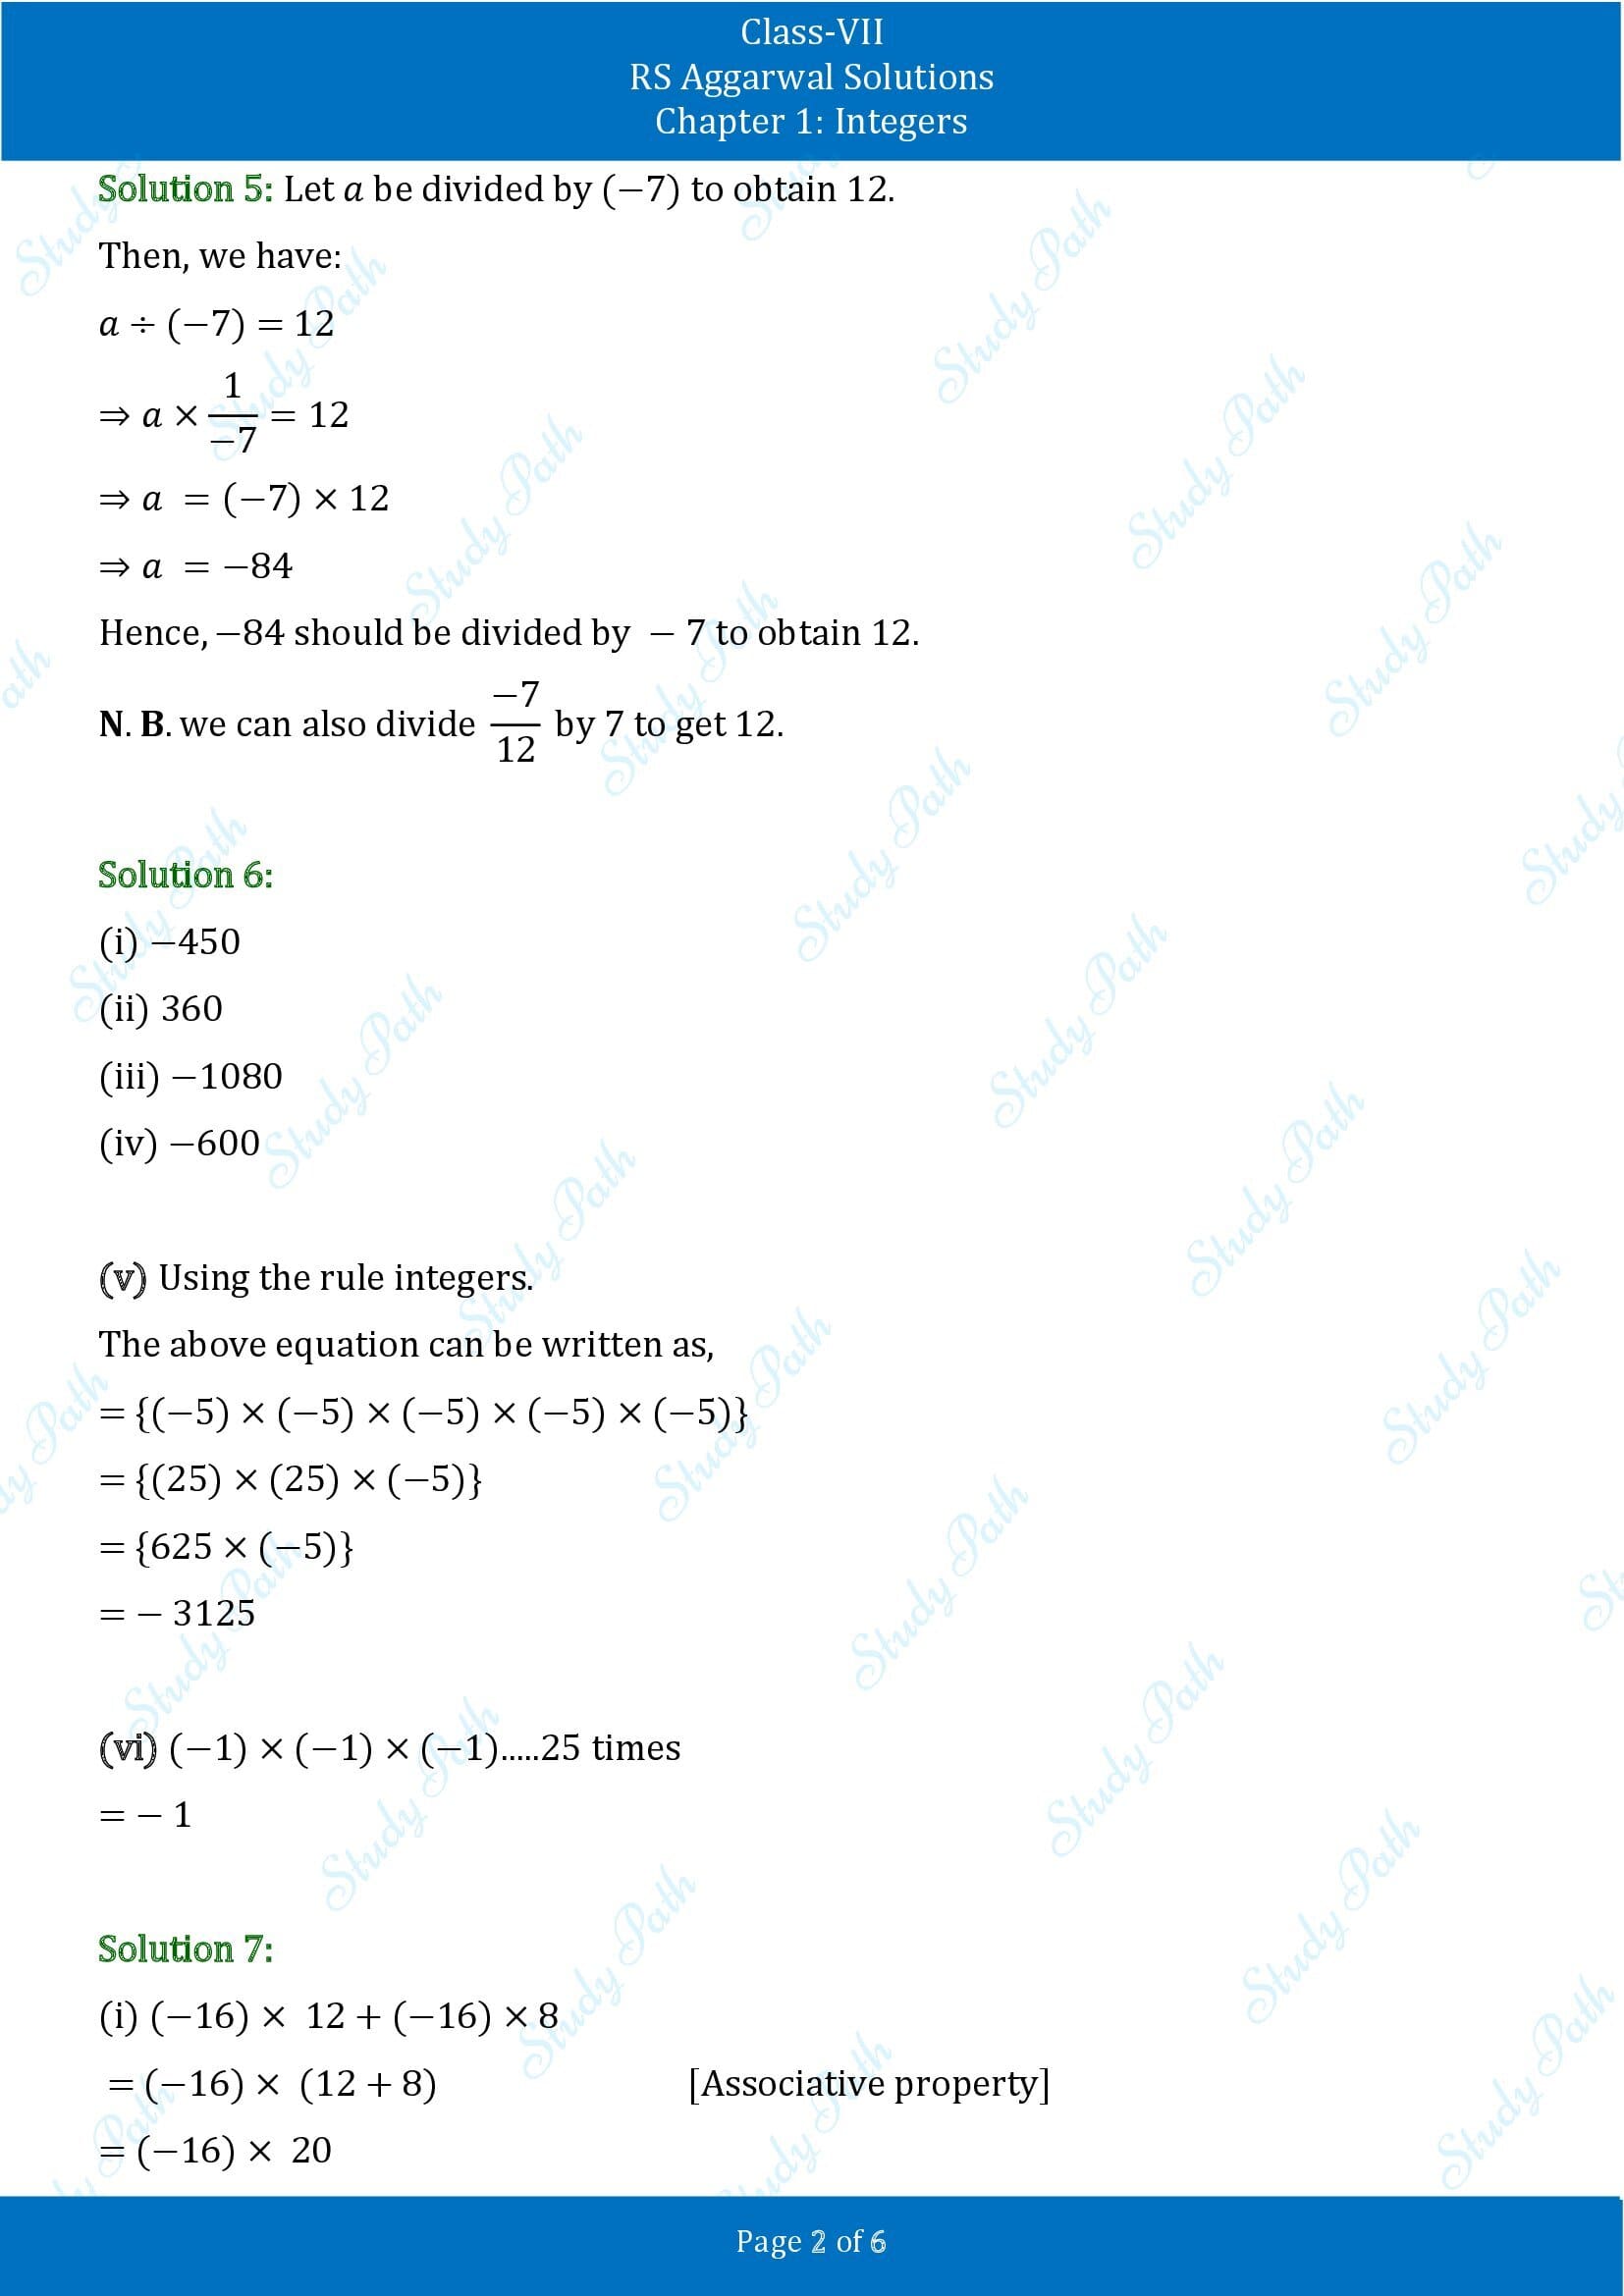 RS Aggarwal Solutions Class 7 Chapter 1 Integers Test Paper 00002